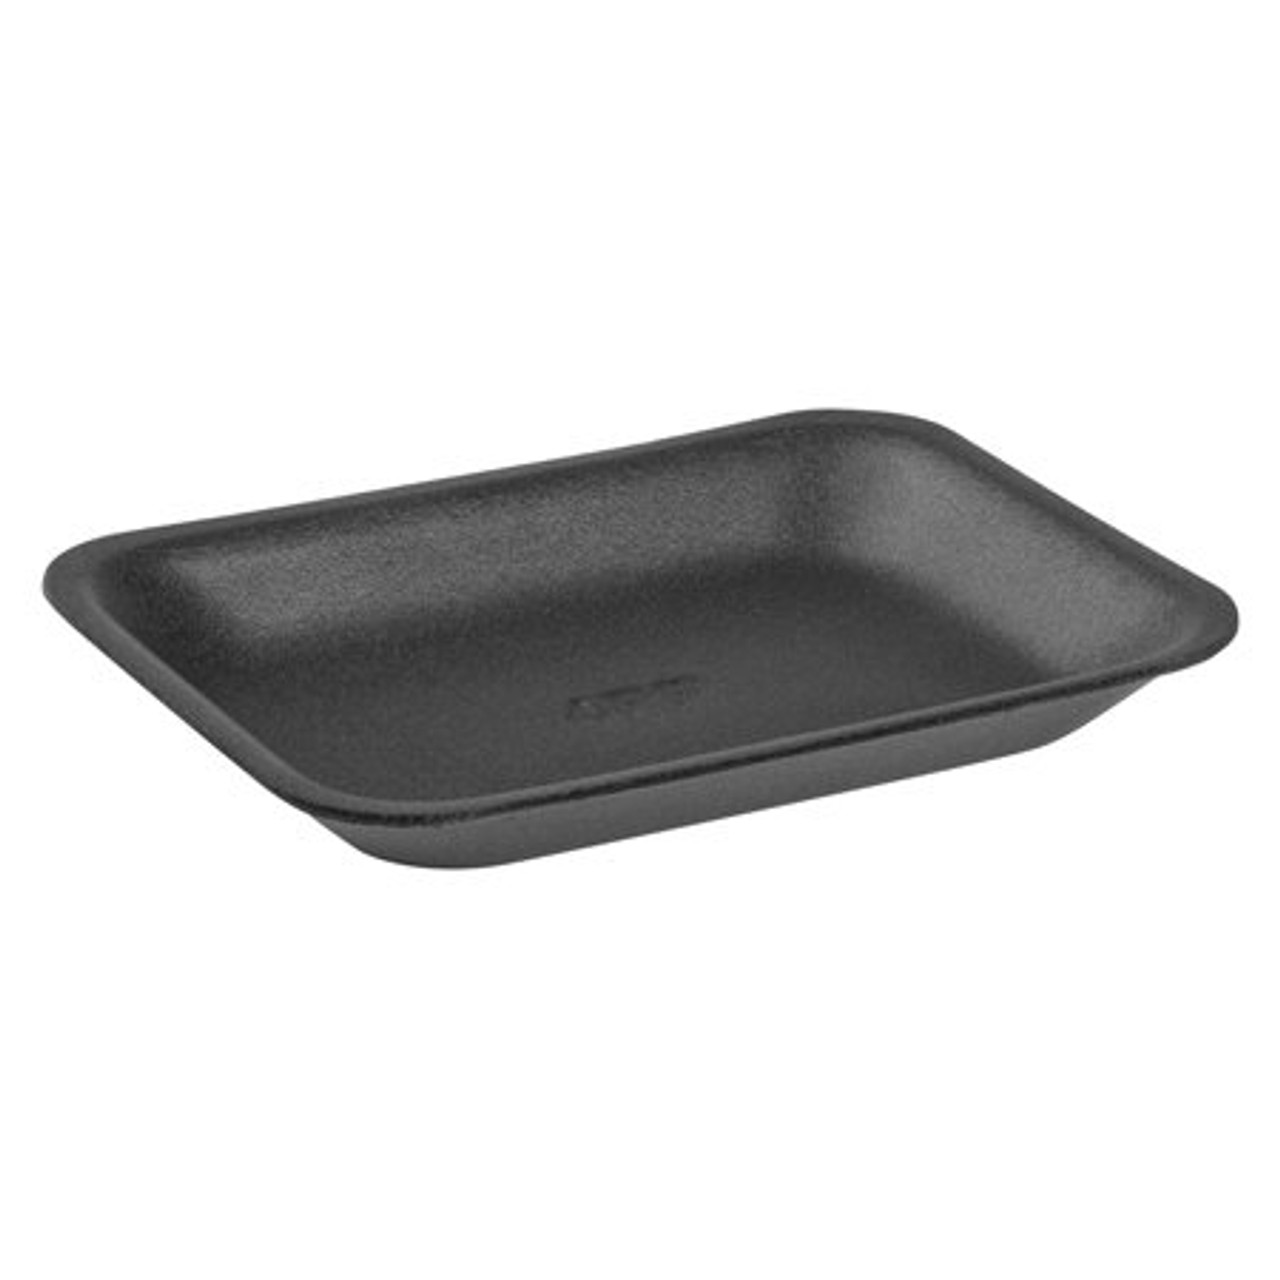 Foam Trays For Butchers, Food Shops, And Takeaways - 2 Sizes